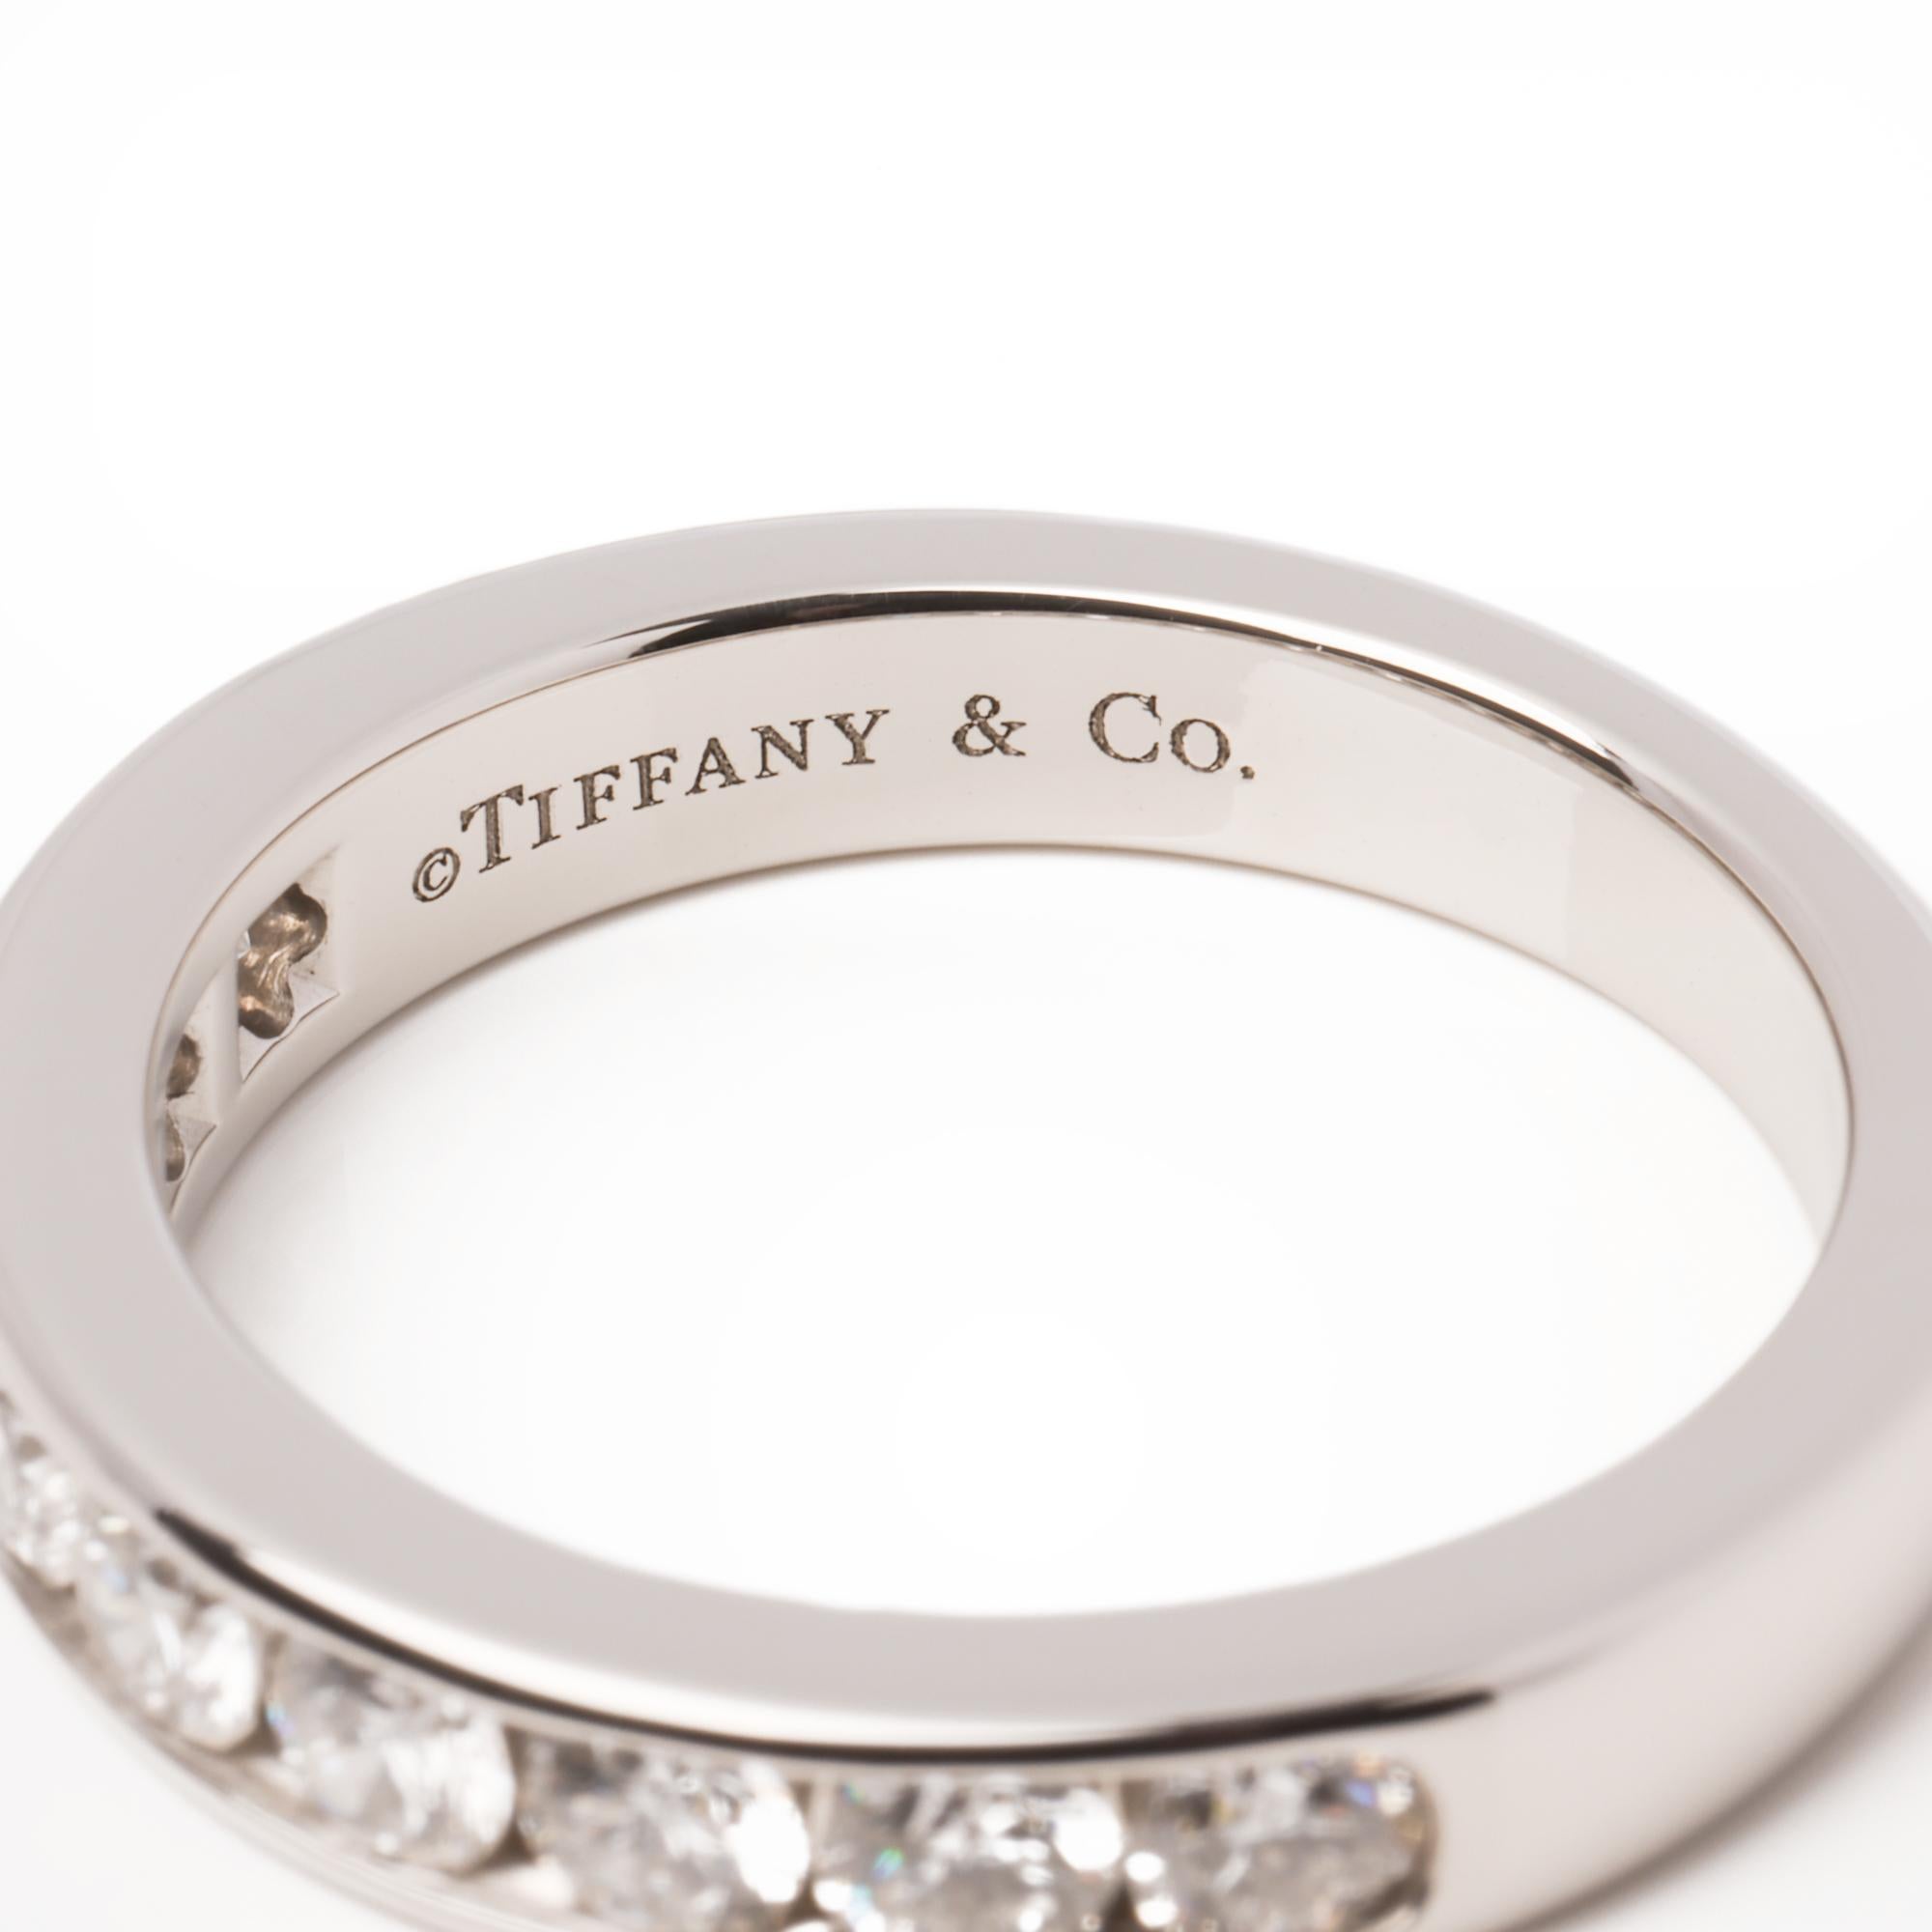 This ring by Tiffany & Co. features 9 round brilliant cut diamonds totalling an estimated 0.81ct, set in platinum. UK ring size M. EU ring size 53. US ring size 61/2.